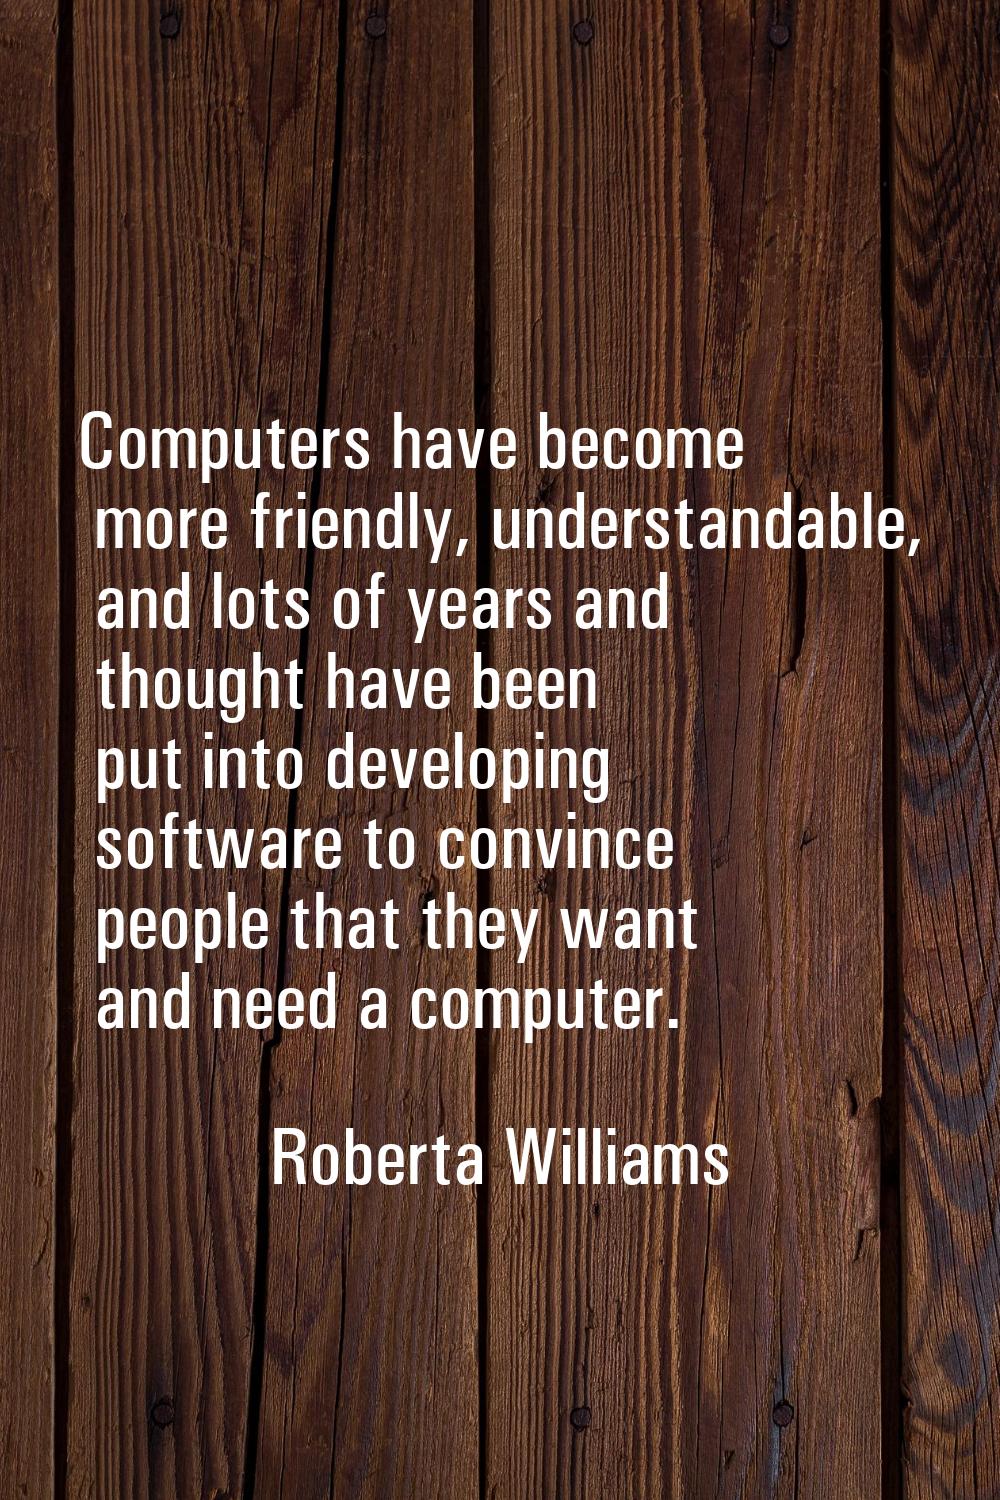 Computers have become more friendly, understandable, and lots of years and thought have been put in